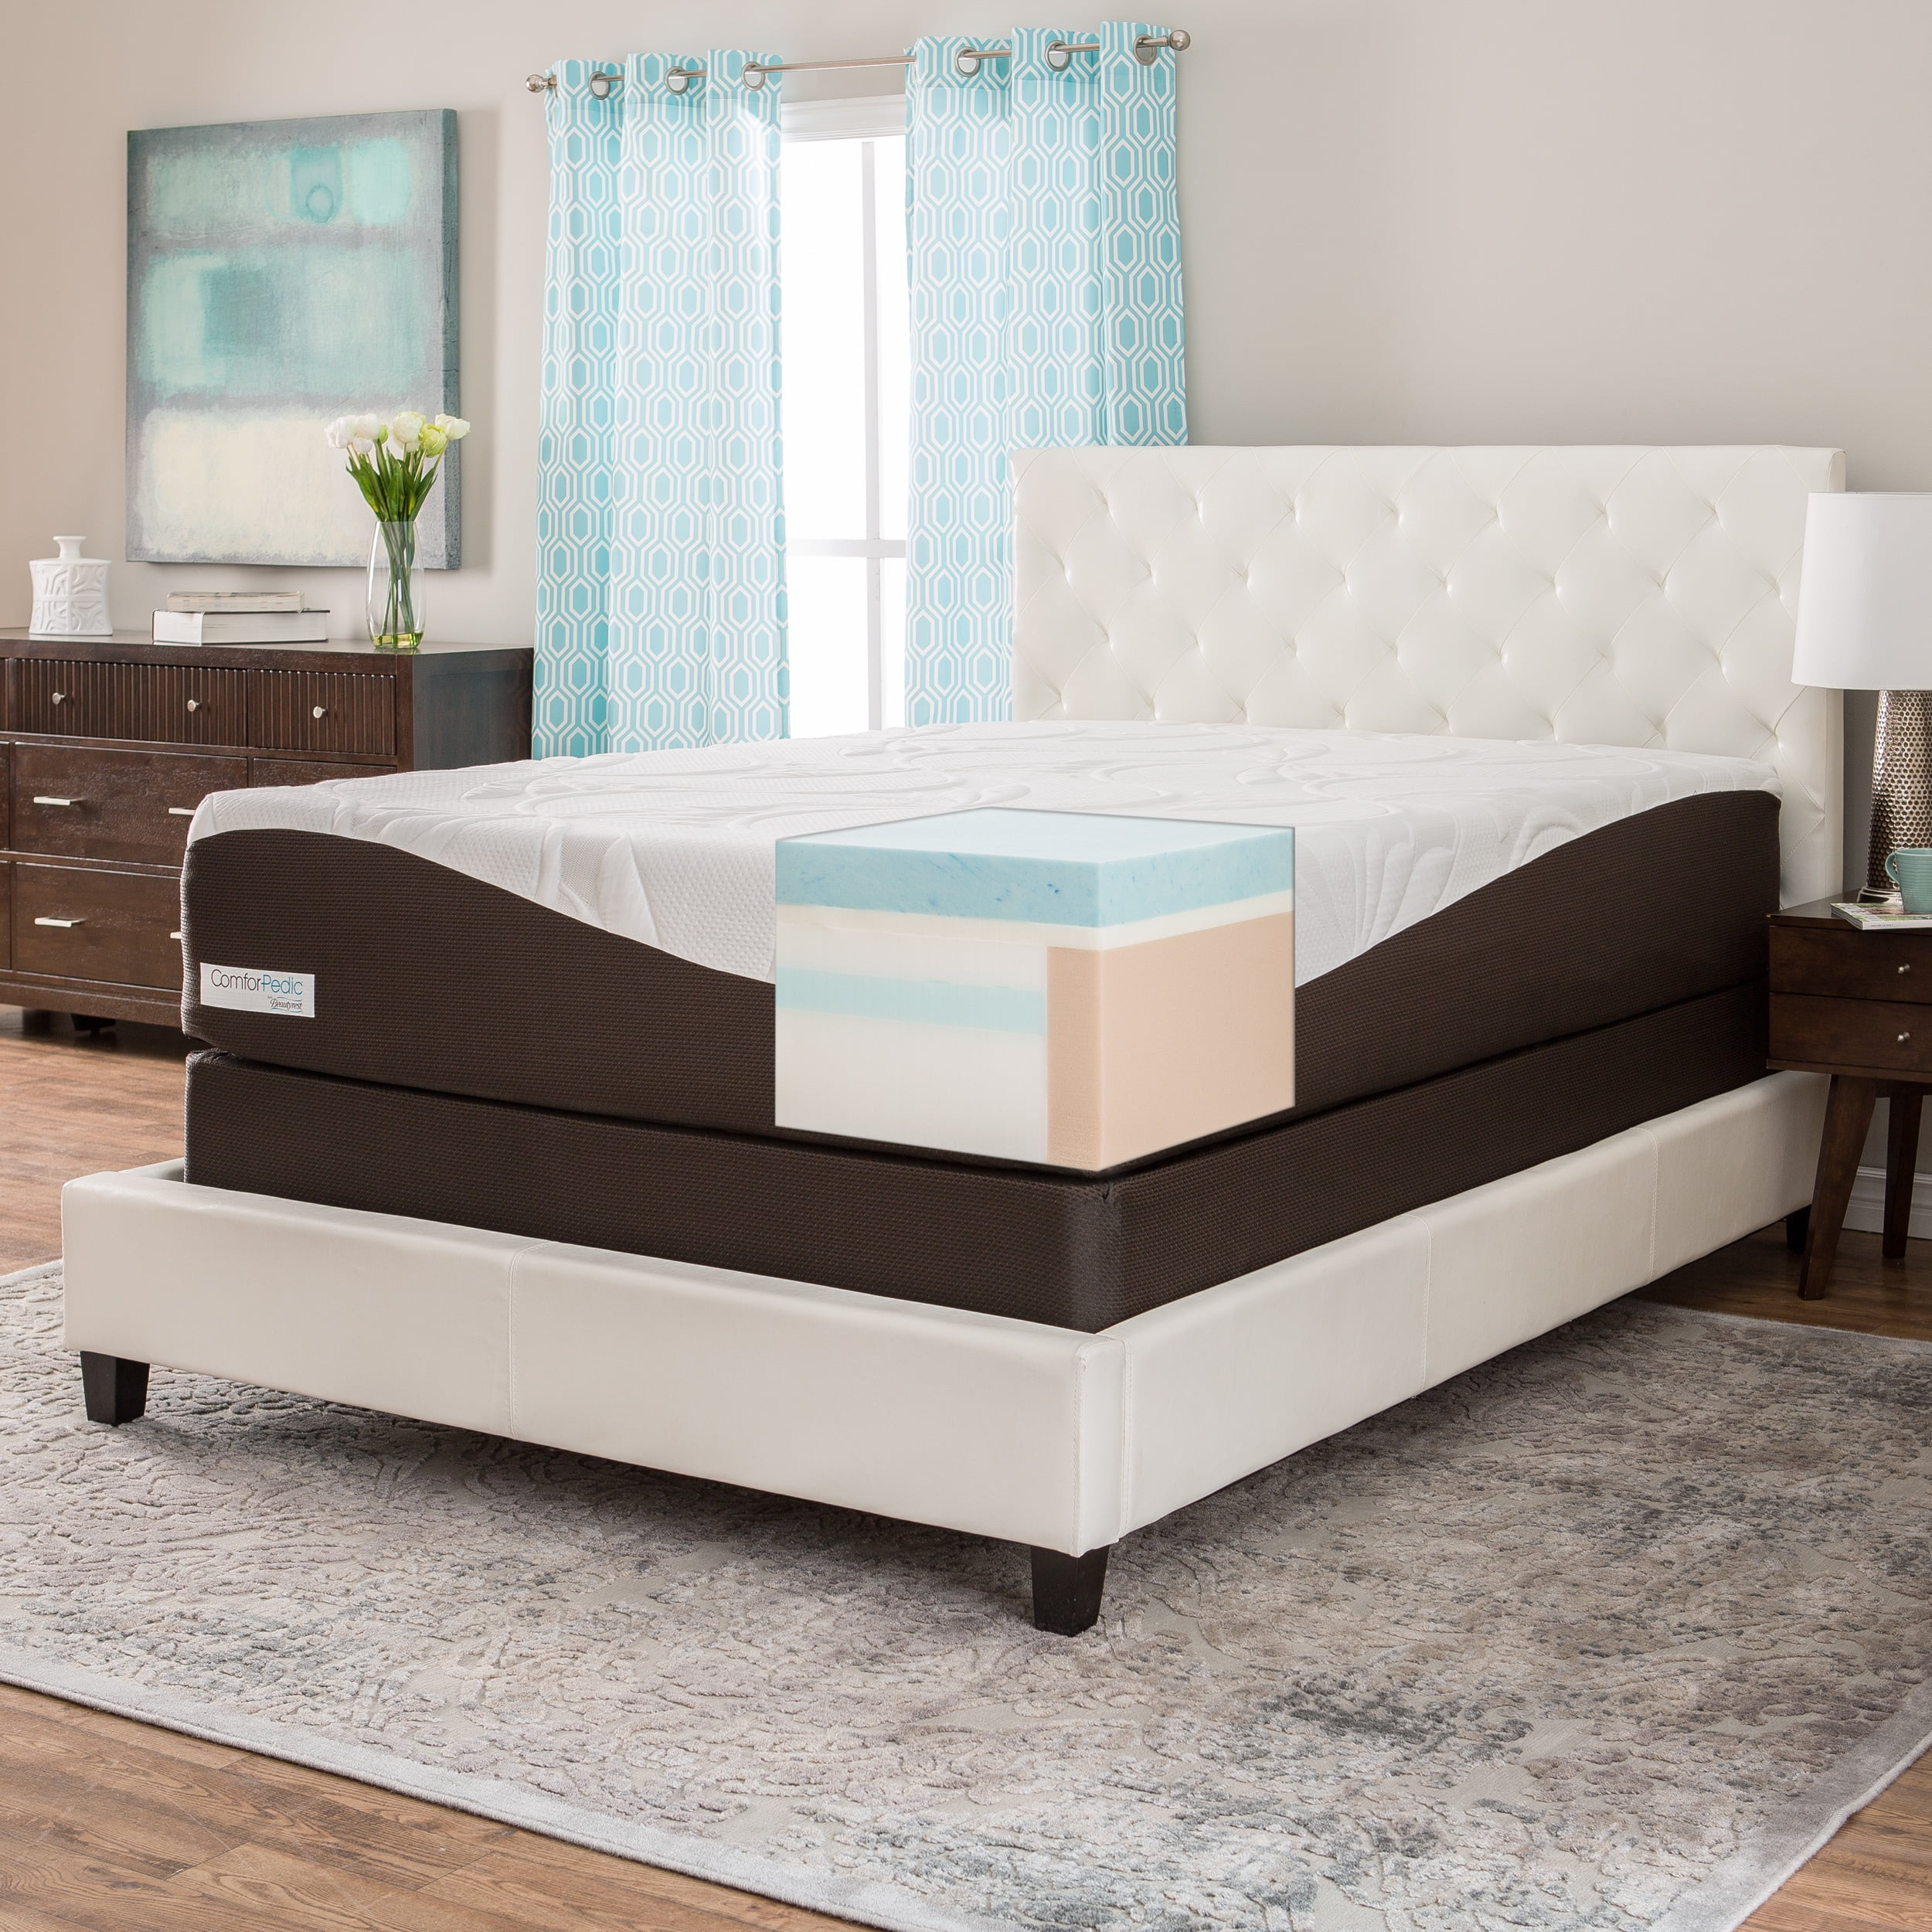 Simmons Beautyrest Comforpedic from Beautyrest 14inch